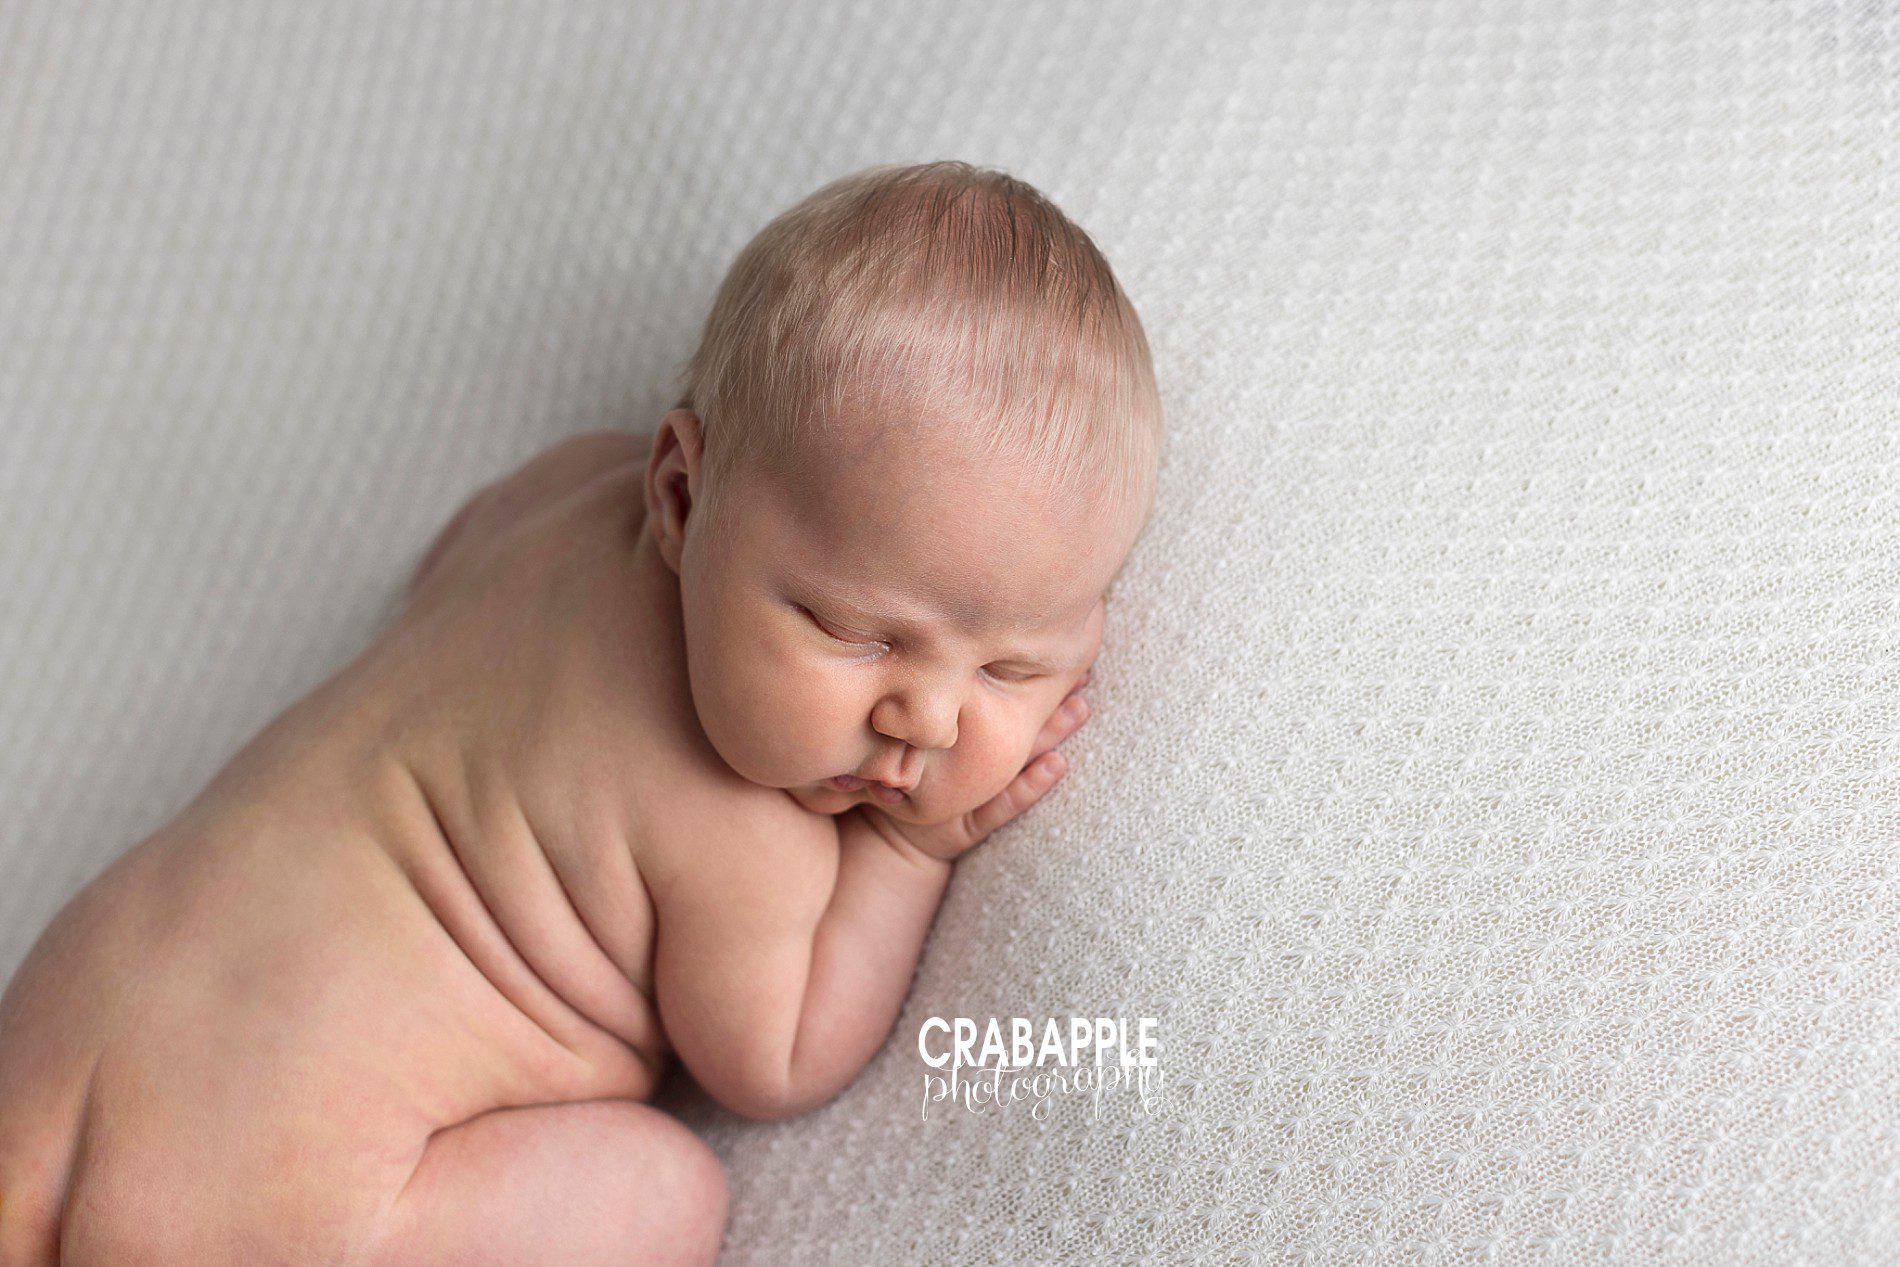 Clean and simple newborn portrait photography.